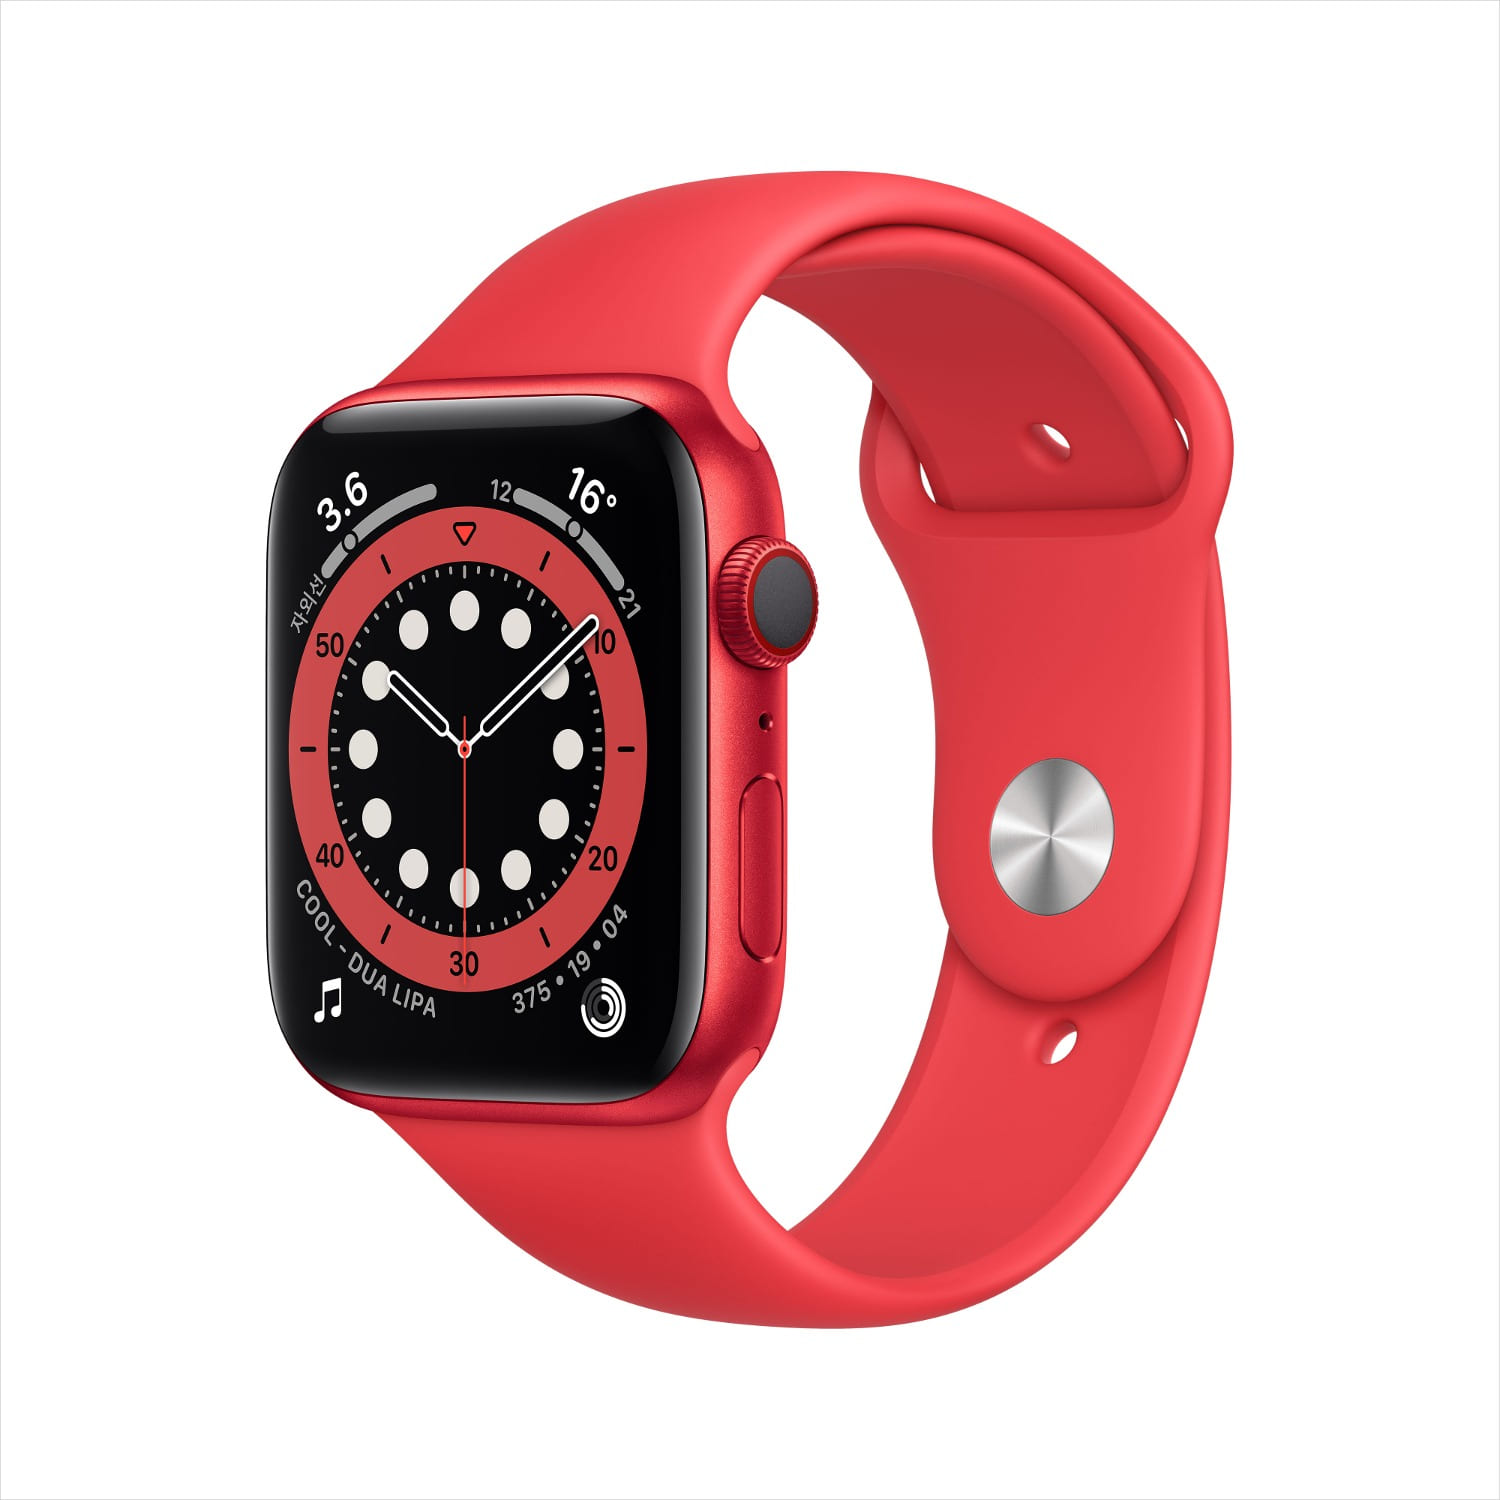 Apple Watch S6 Cellular 44mm PRODUCT(RED) 알루미늄 케이스, PRODUCT(RED) 스포츠 밴드 * M09C3KH/A